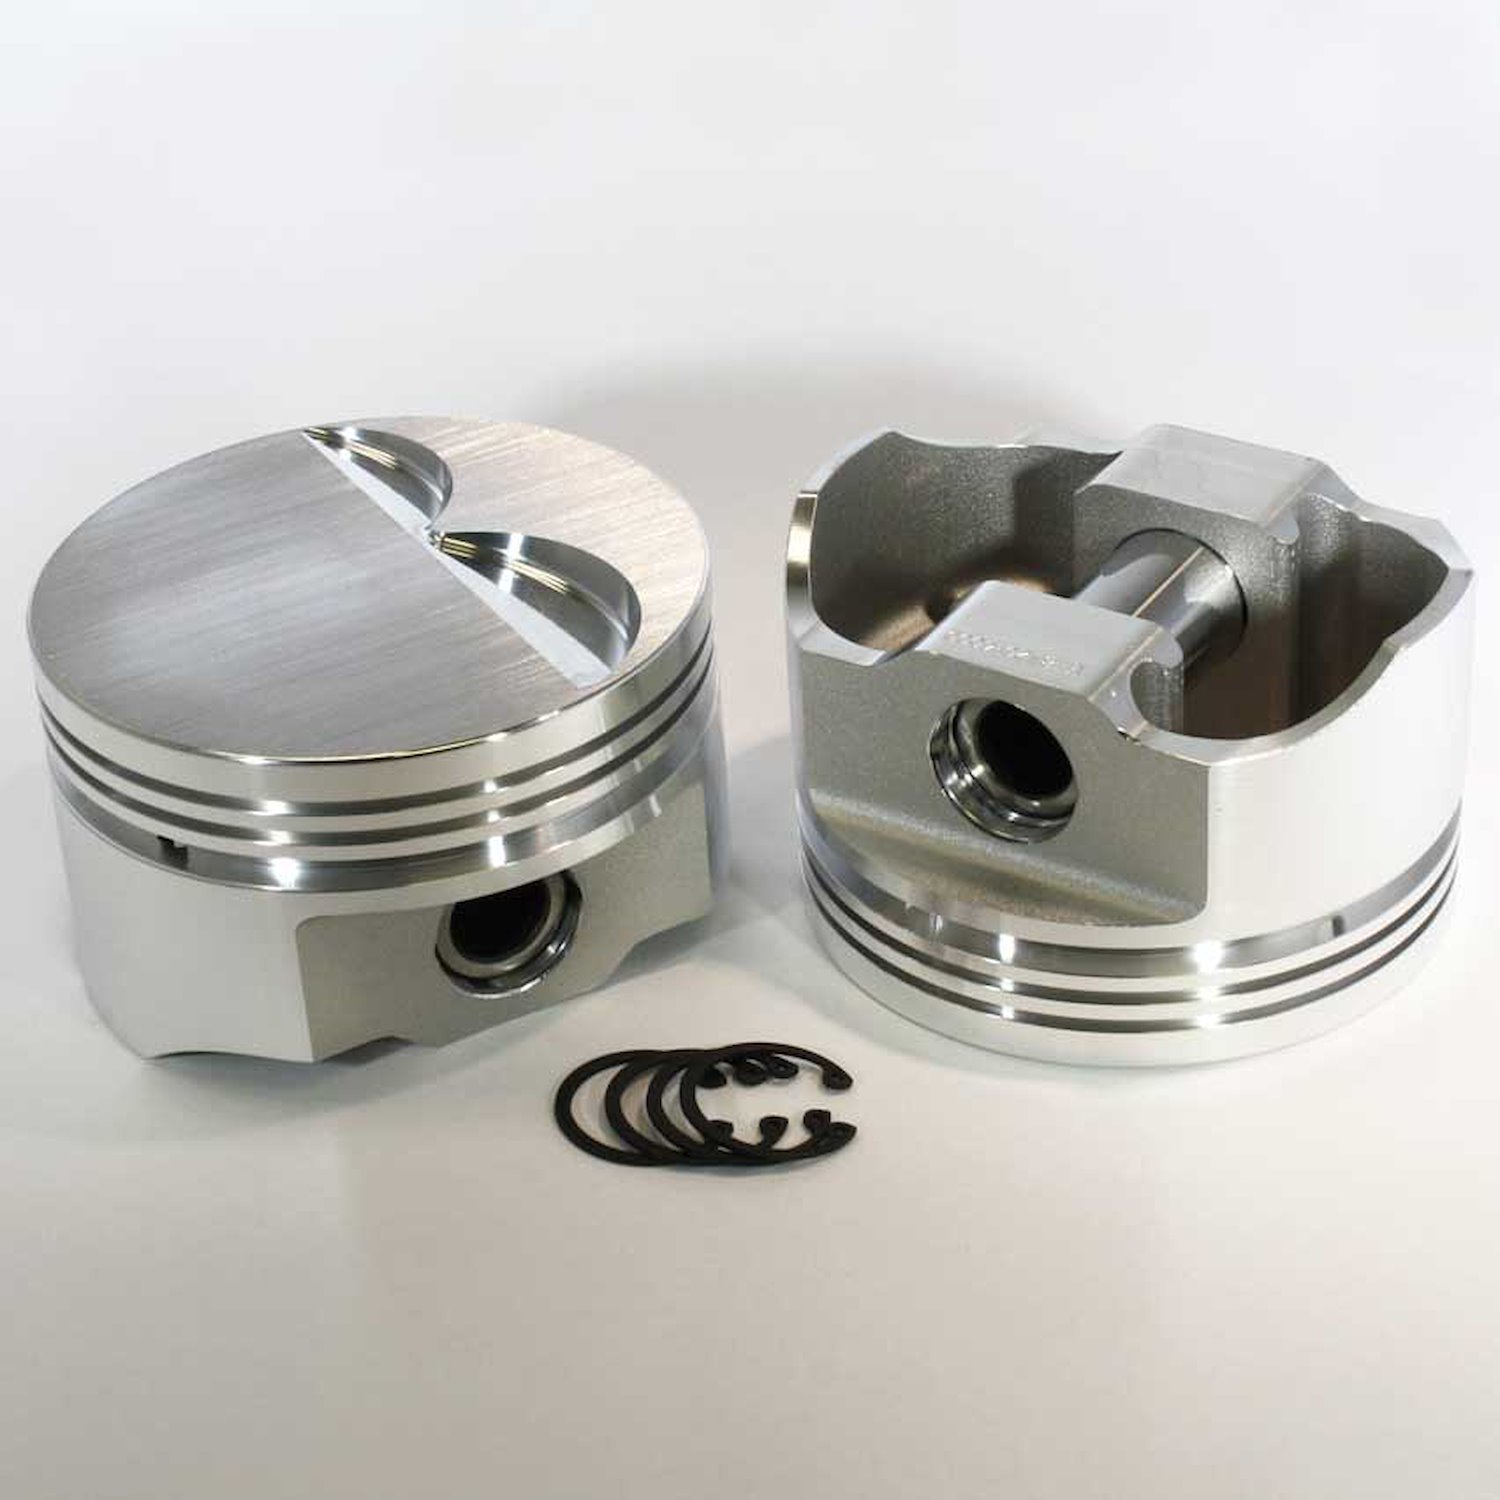 8785-4070 E-Series Flat Top Piston Set for 1999-2019 Chevy LS, 4.070 in. Bore, -3cc Volume [OEM Stroke]